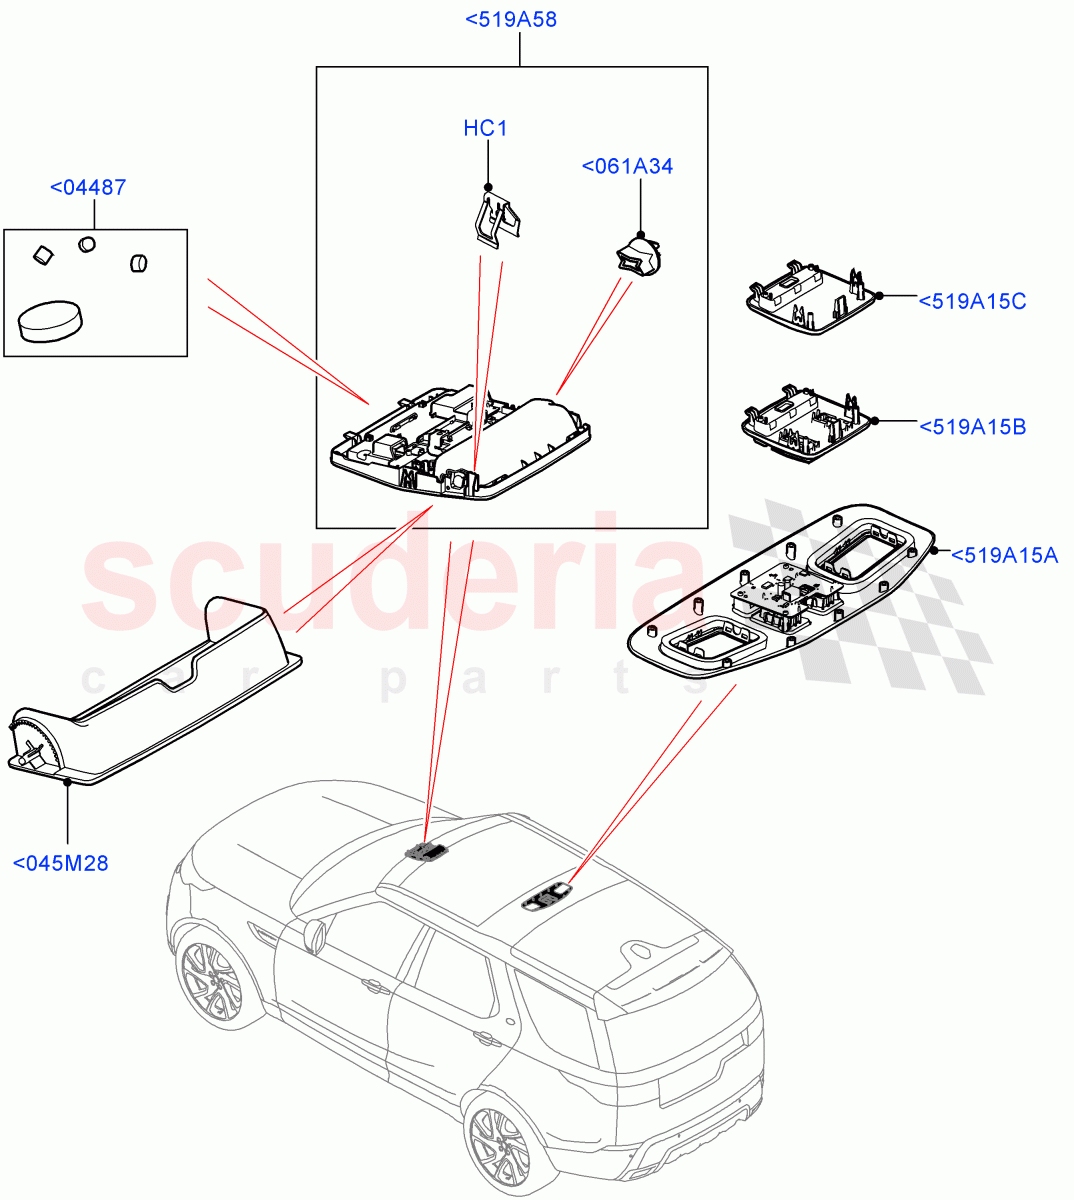 Console - Overhead(Solihull Plant Build)((V)FROMHA000001) of Land Rover Land Rover Discovery 5 (2017+) [3.0 DOHC GDI SC V6 Petrol]